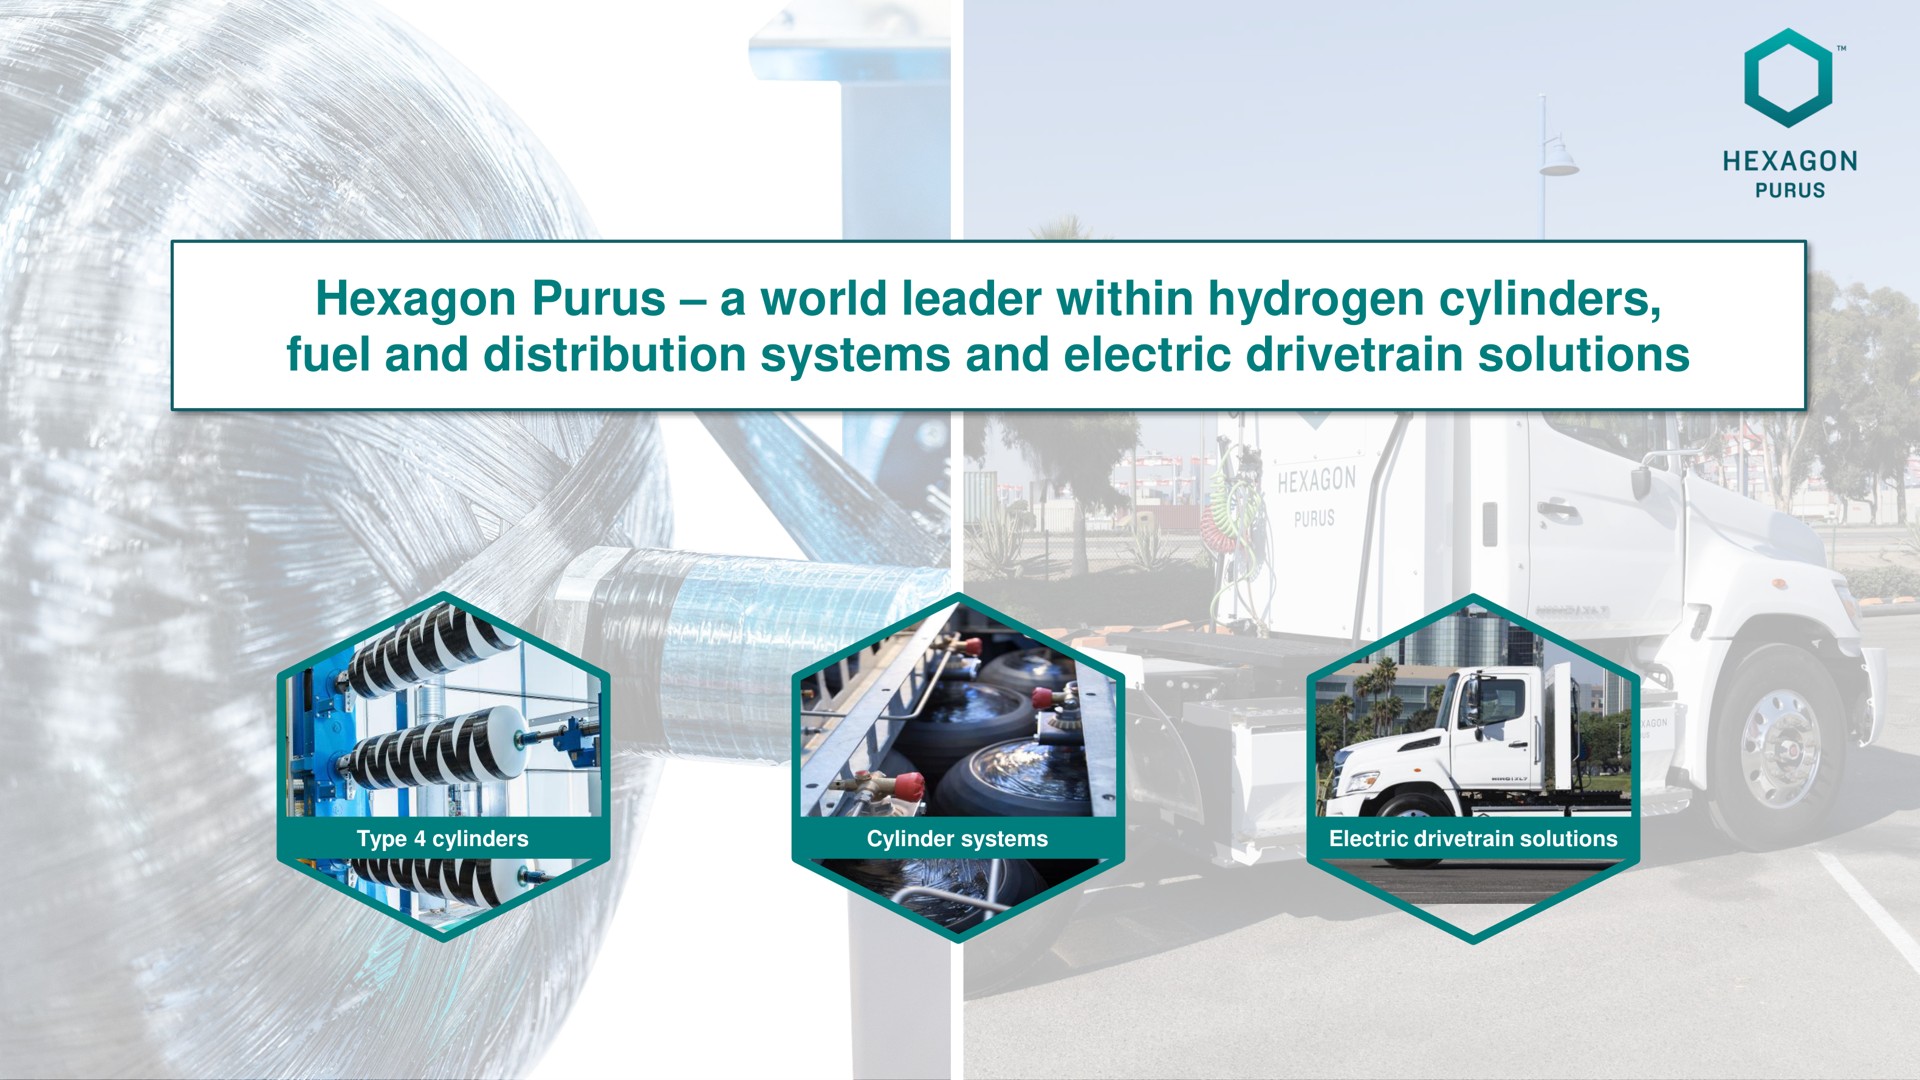 hexagon a world leader within hydrogen cylinders fuel and distribution systems and electric solutions | Hexagon Purus